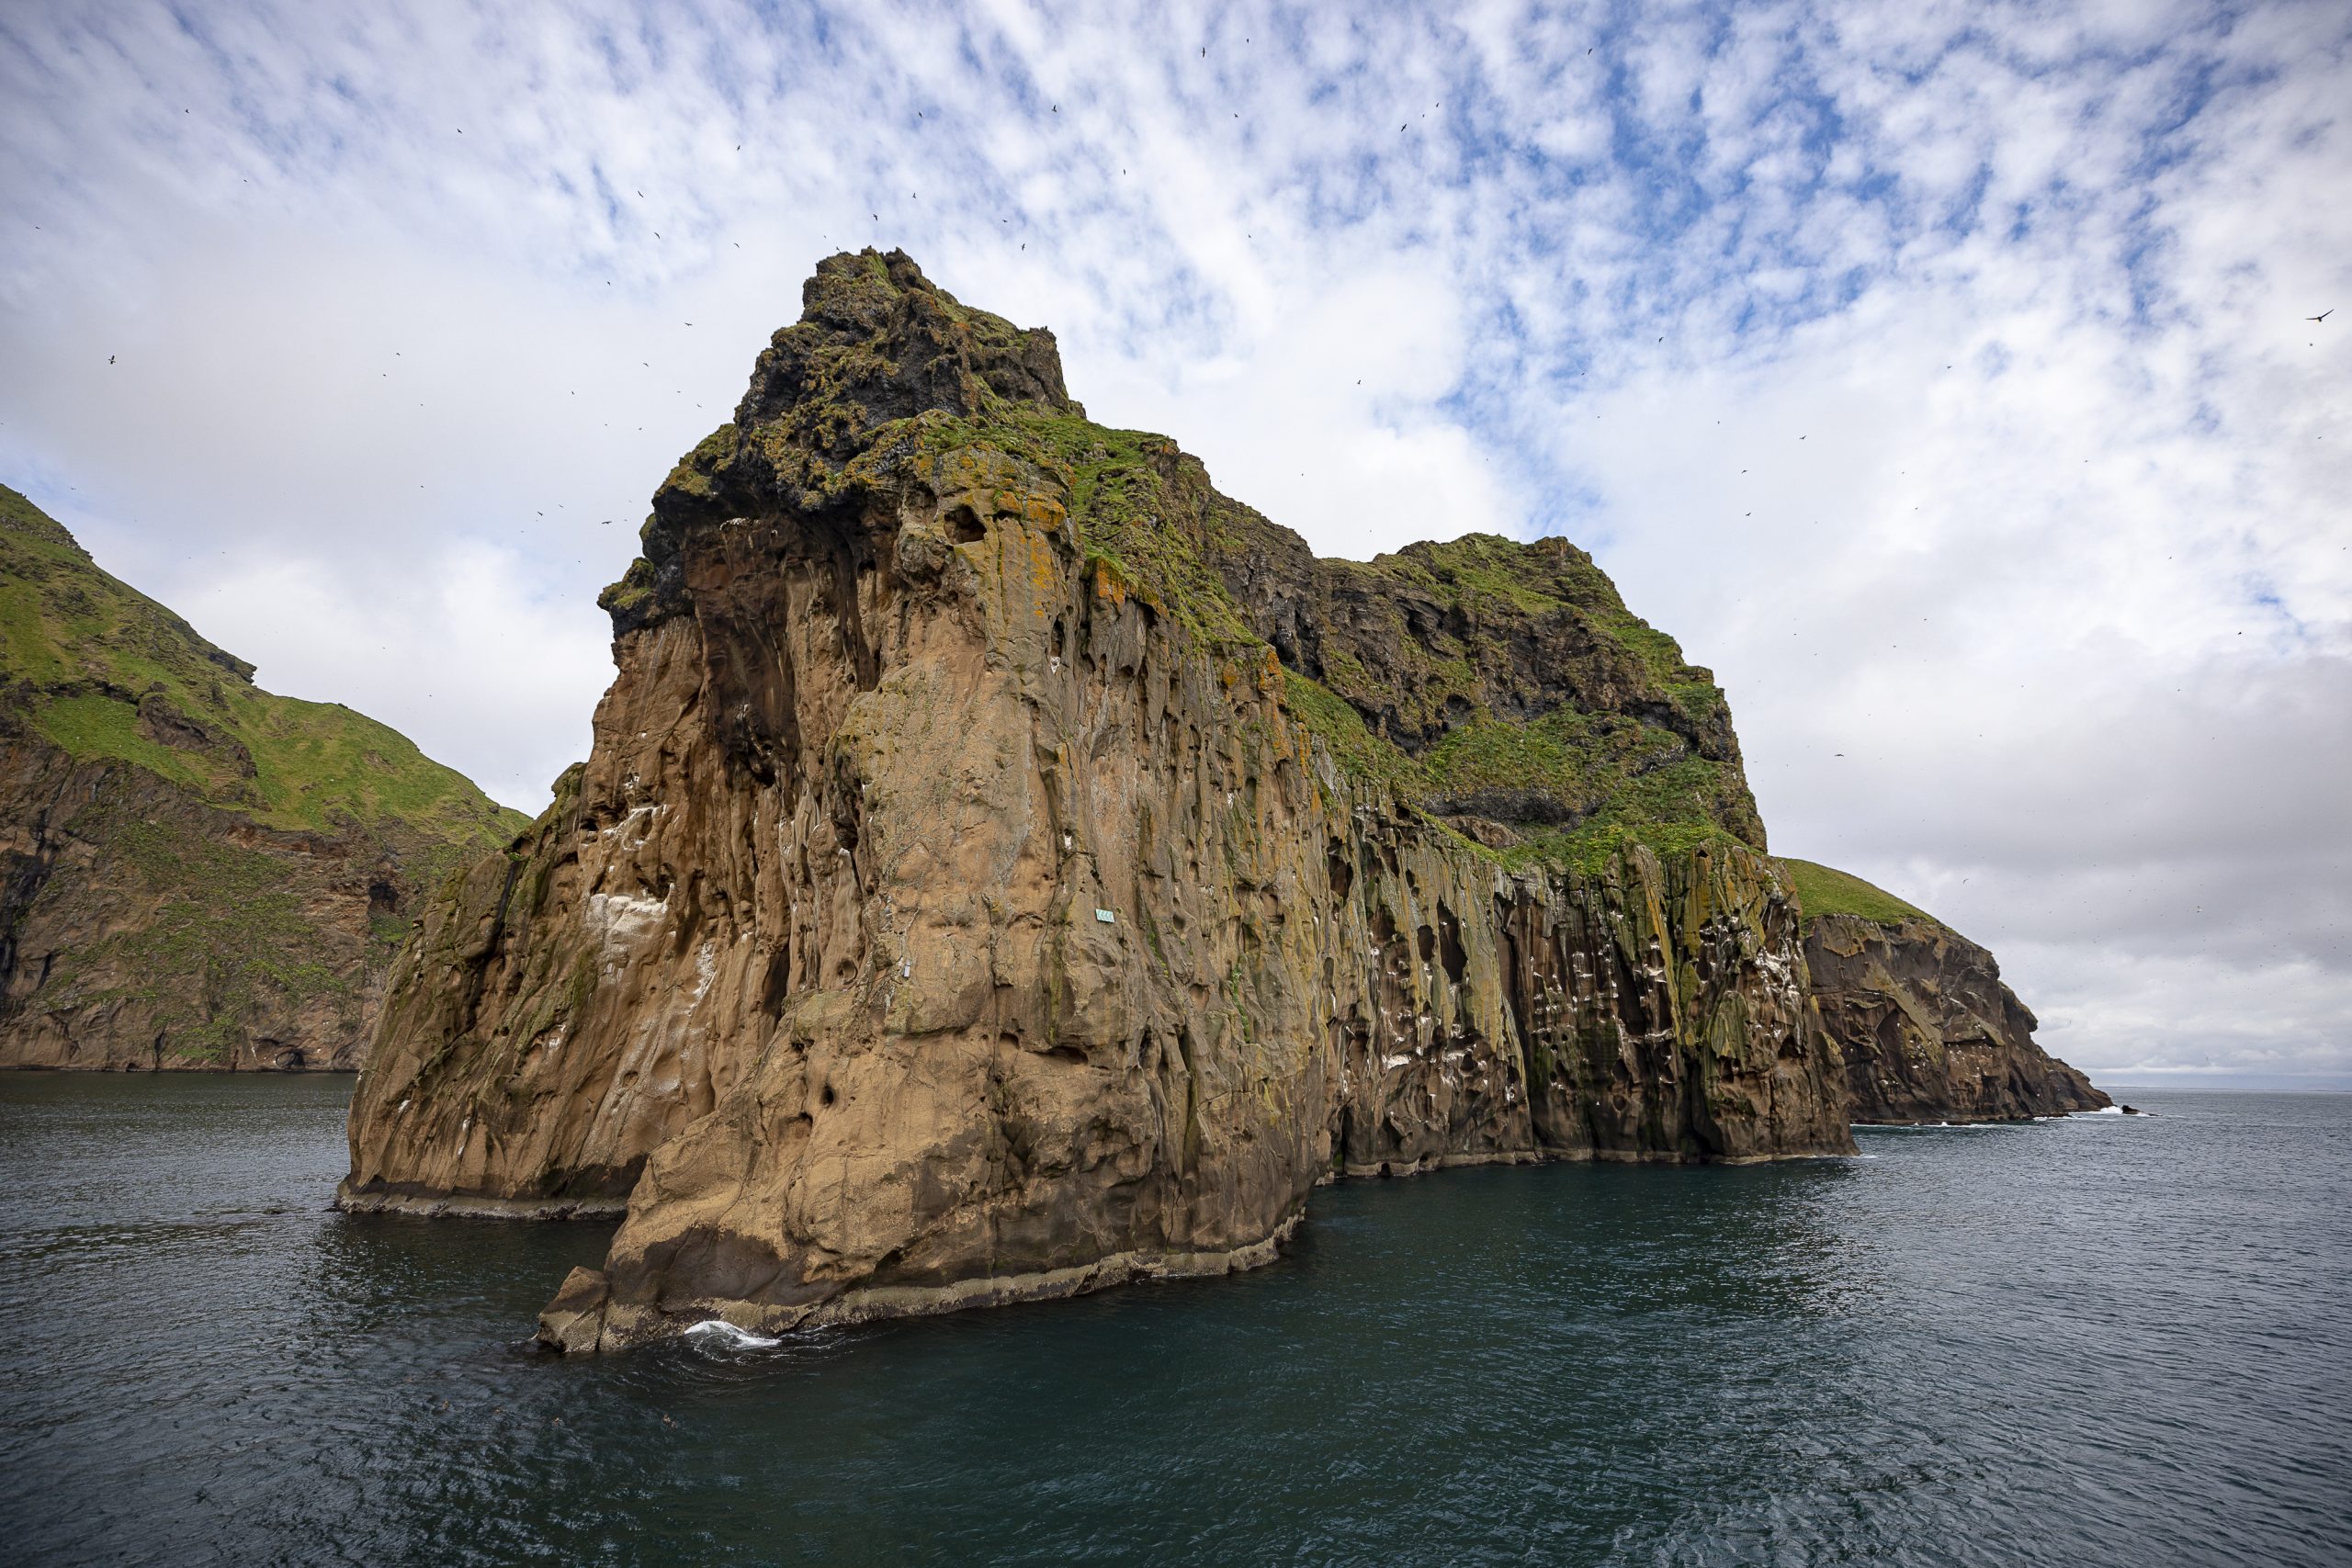 Food, good people and full residents in the Westman Islands